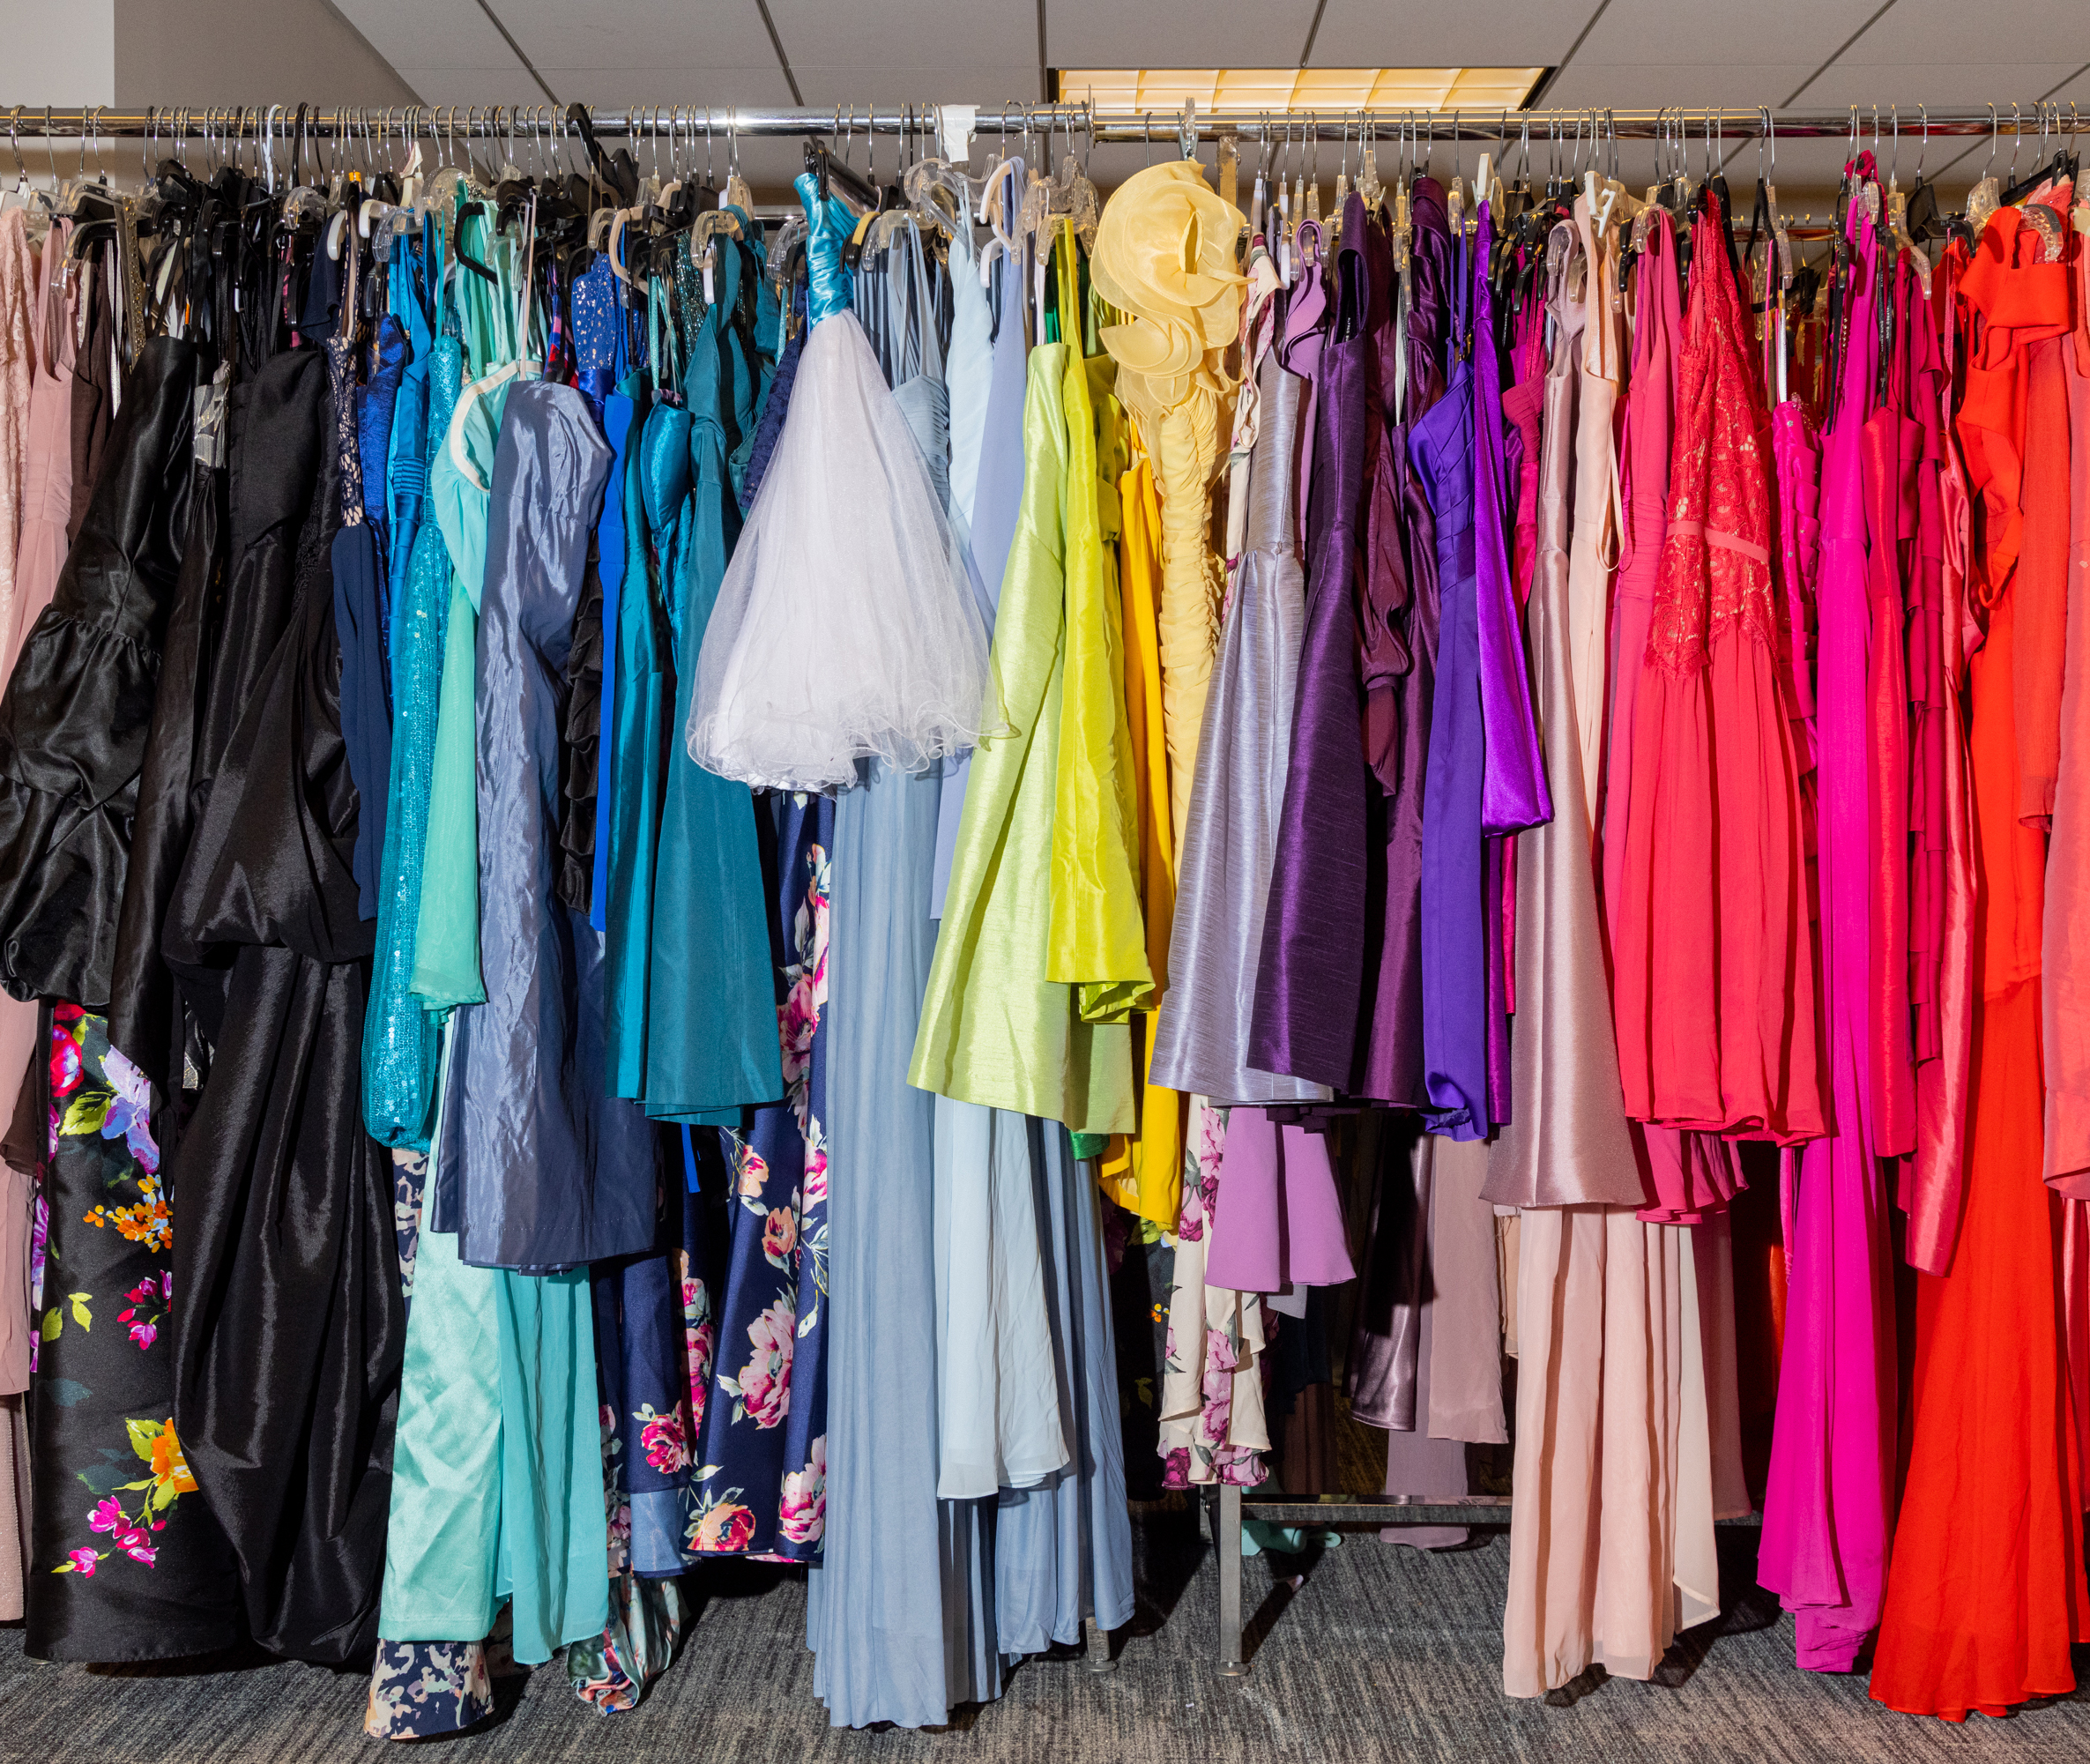 A range of colorful formal dresses hanging on racks in a store.